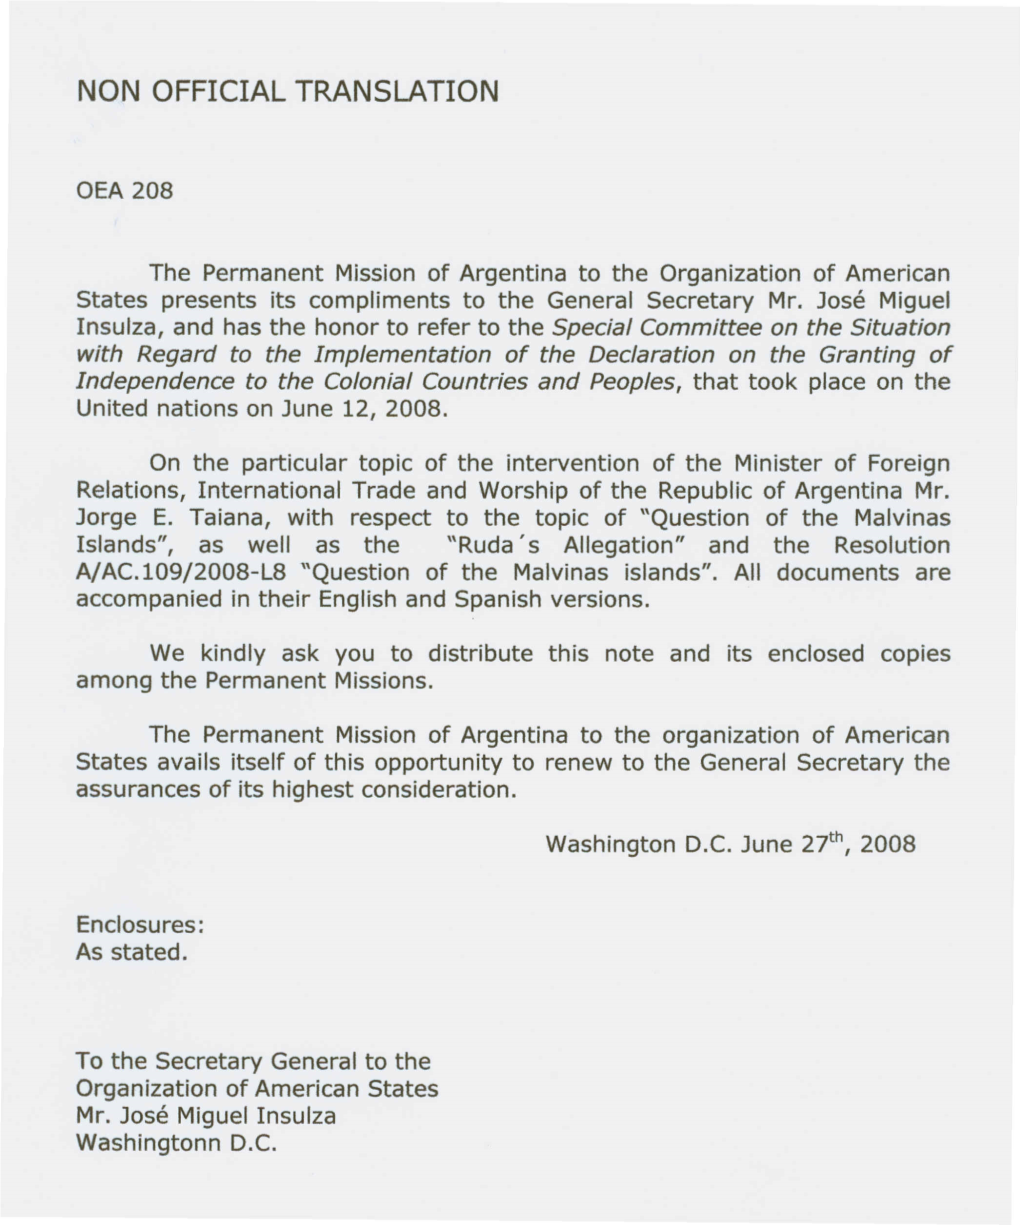 The Permanent Mission of Argentina to the Organization of American States Presents Its Compliments to the General Secretary Mr